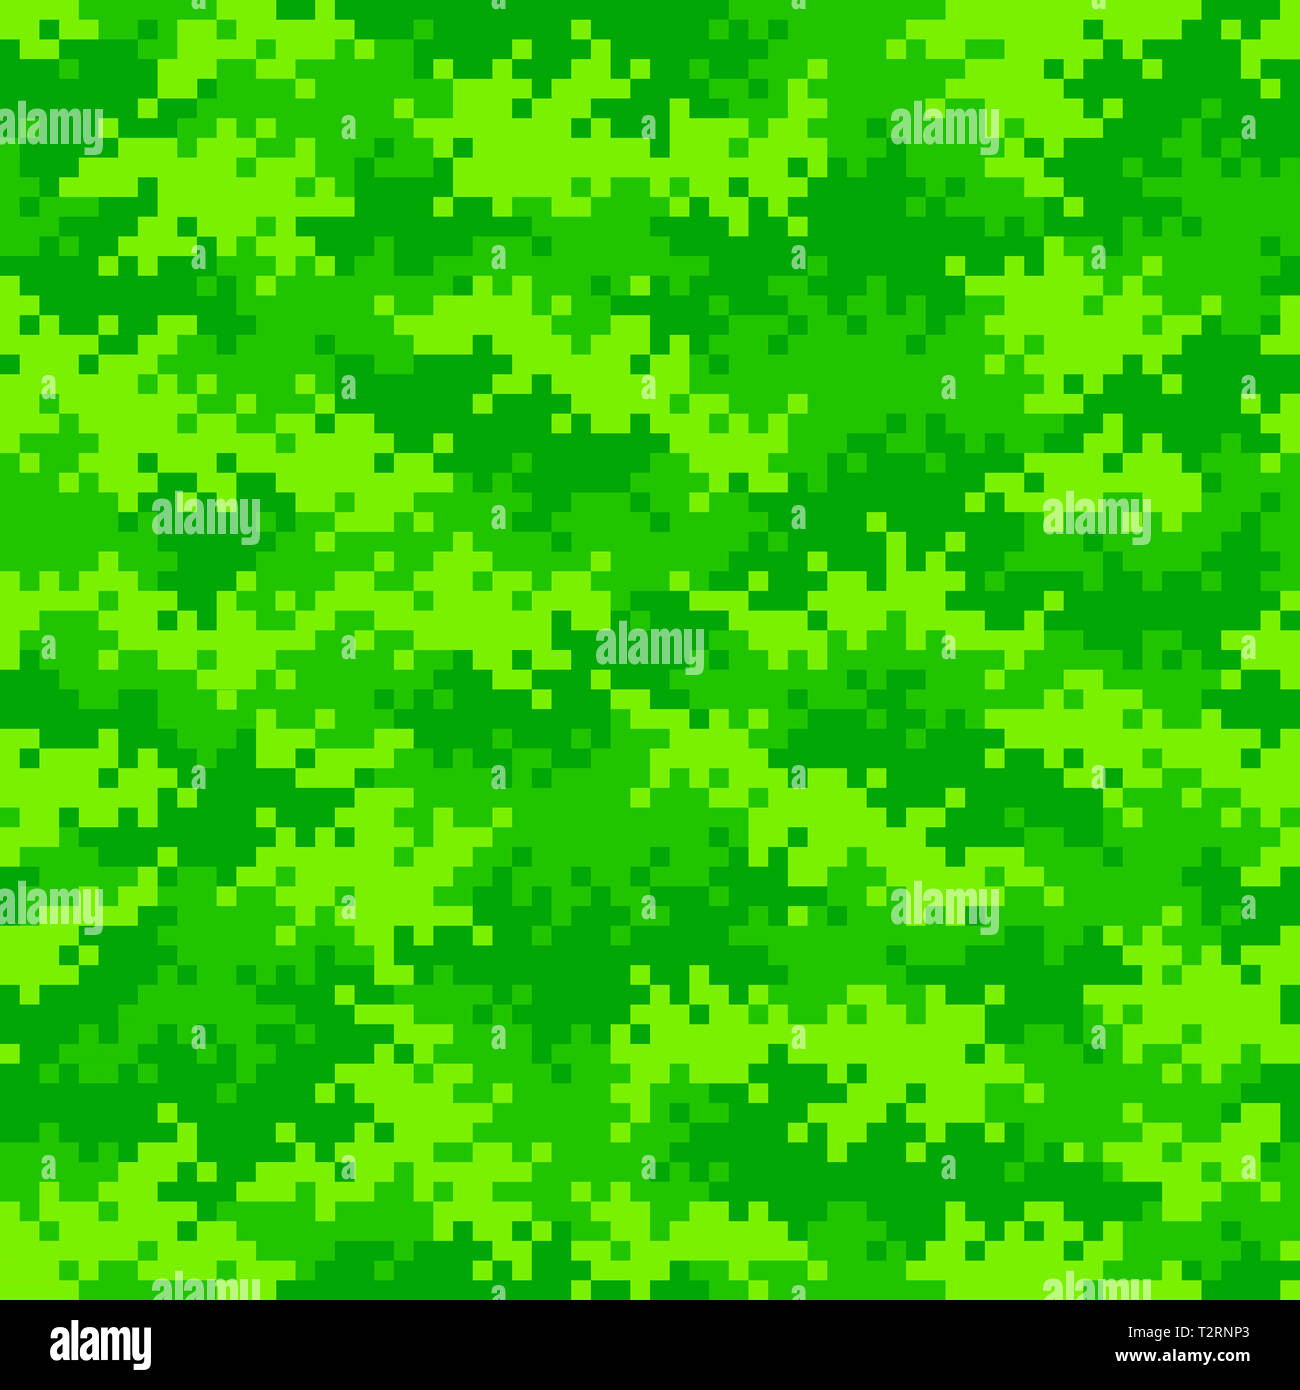 Neon green camouflage pixel pattern seamlessly tileable Stock Photo - Alamy